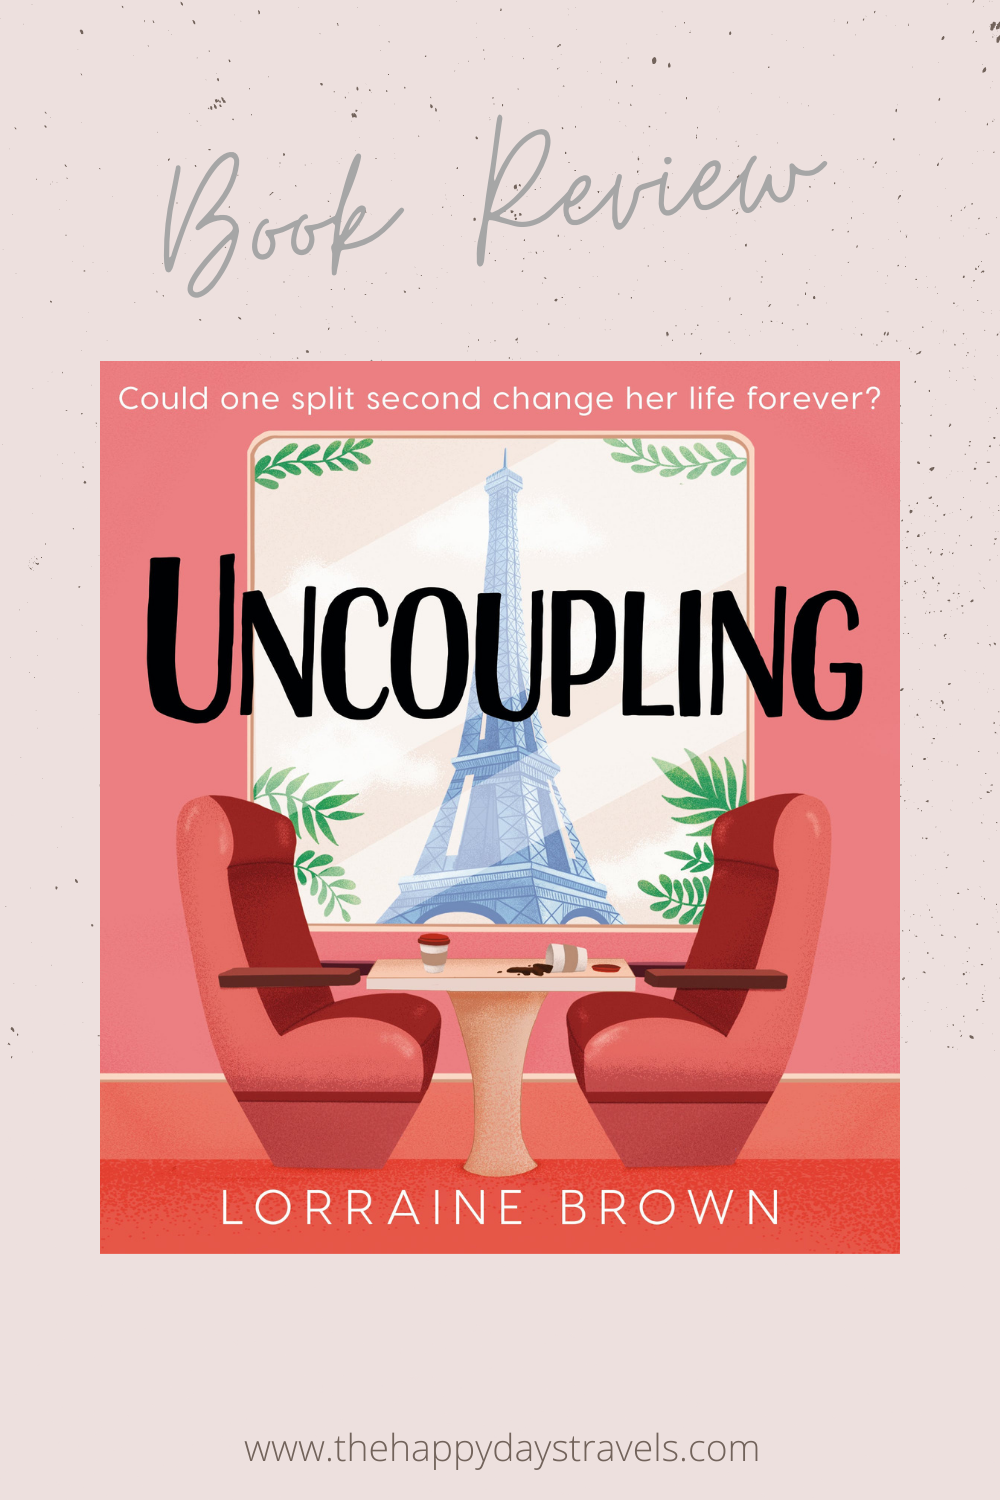 Uncoupling book review pin image. Book cover and travel book blog stamp.